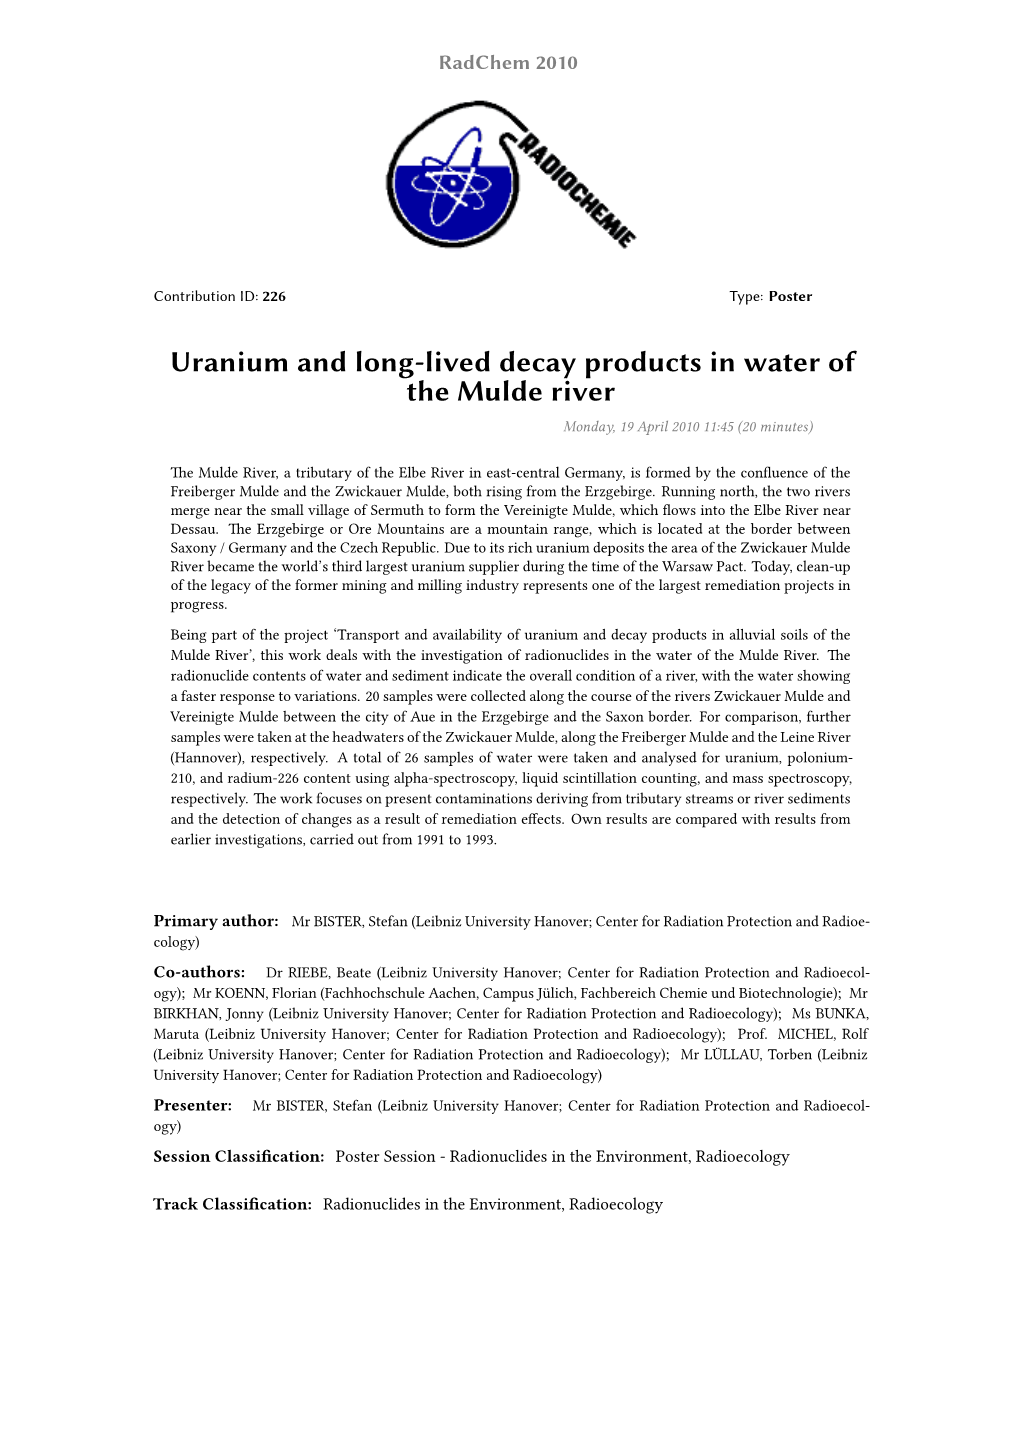 Uranium and Long-Lived Decay Products in Water of the Mulde River Monday, 19 April 2010 11:45 (20 Minutes)